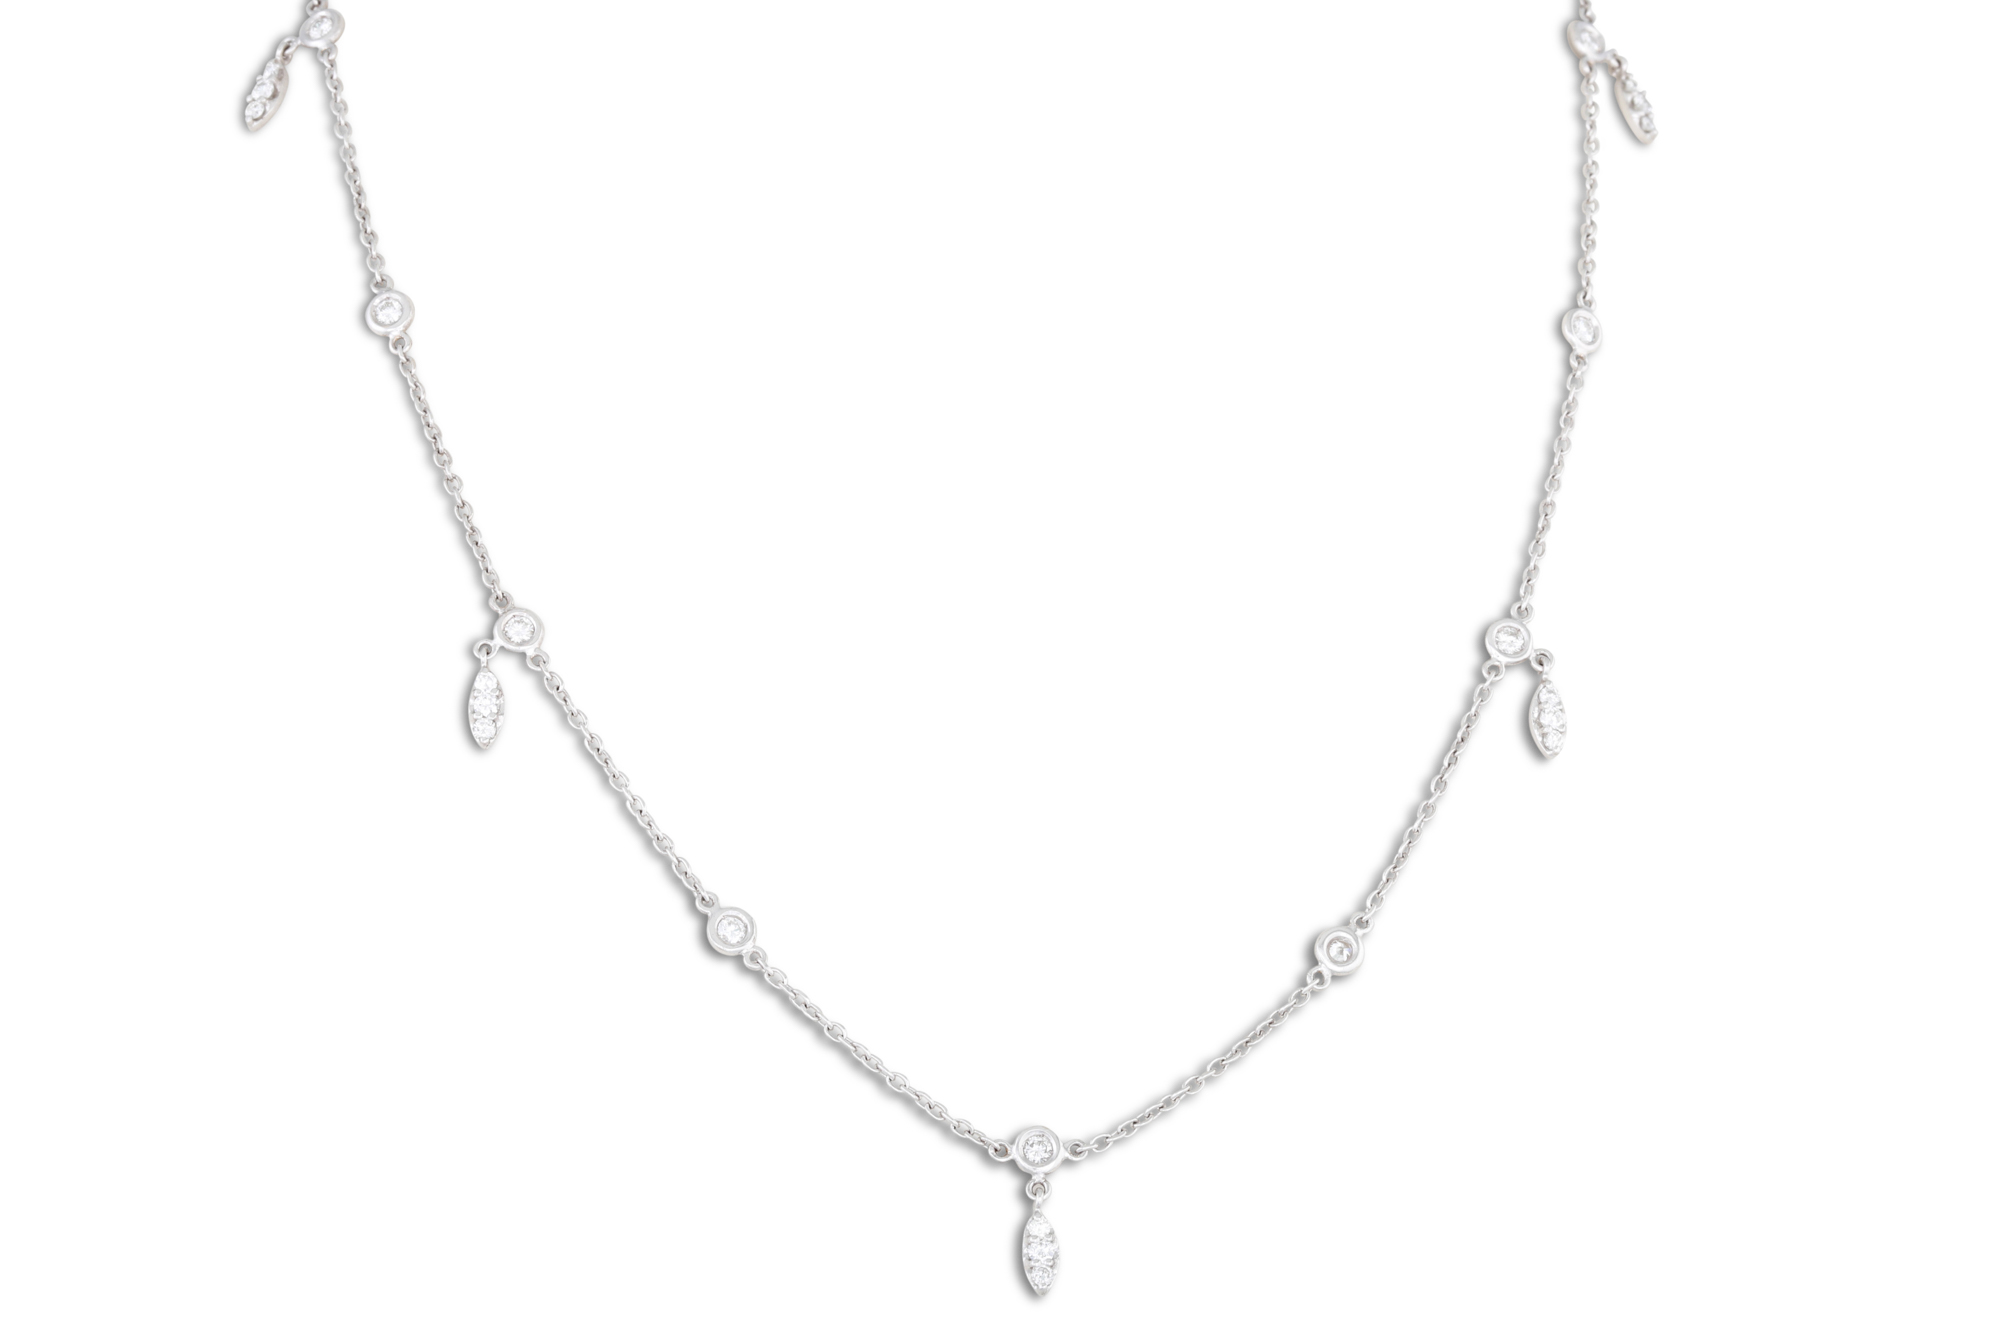 A DIAMOND SET CHAIN, the collet set diamond linked by 18ct white chain, suspending further diamonds.